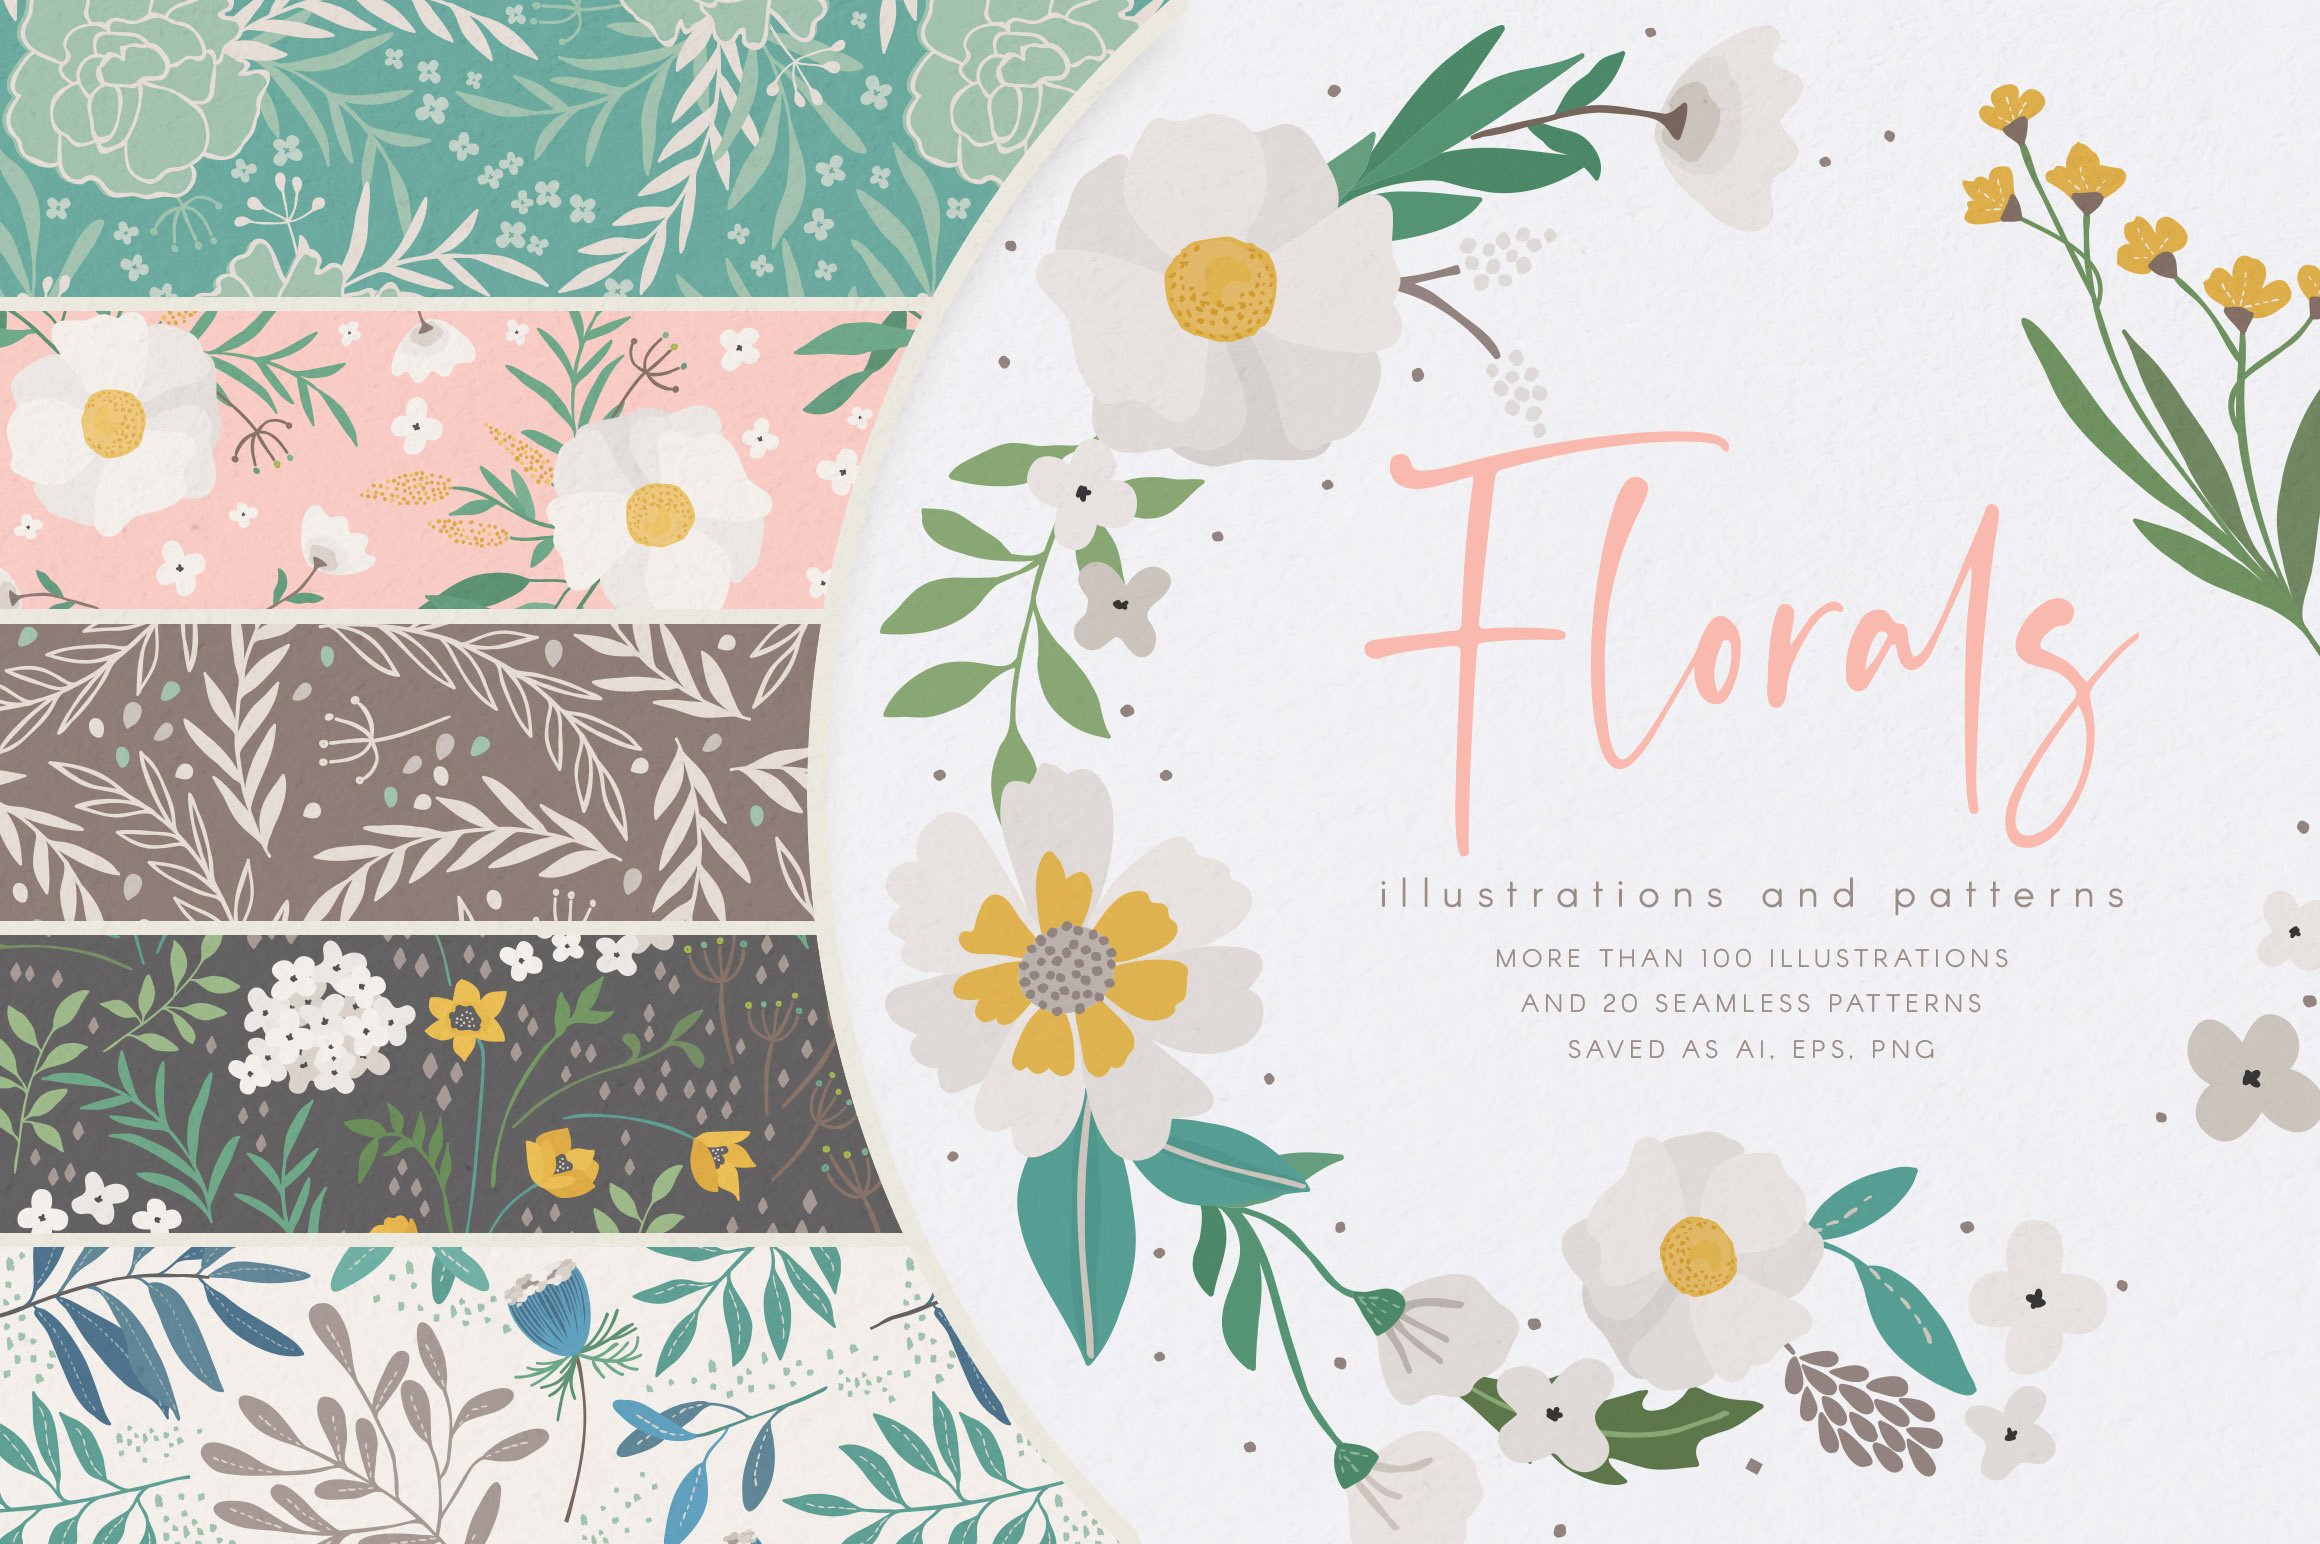 Floral Illustrations and Patterns